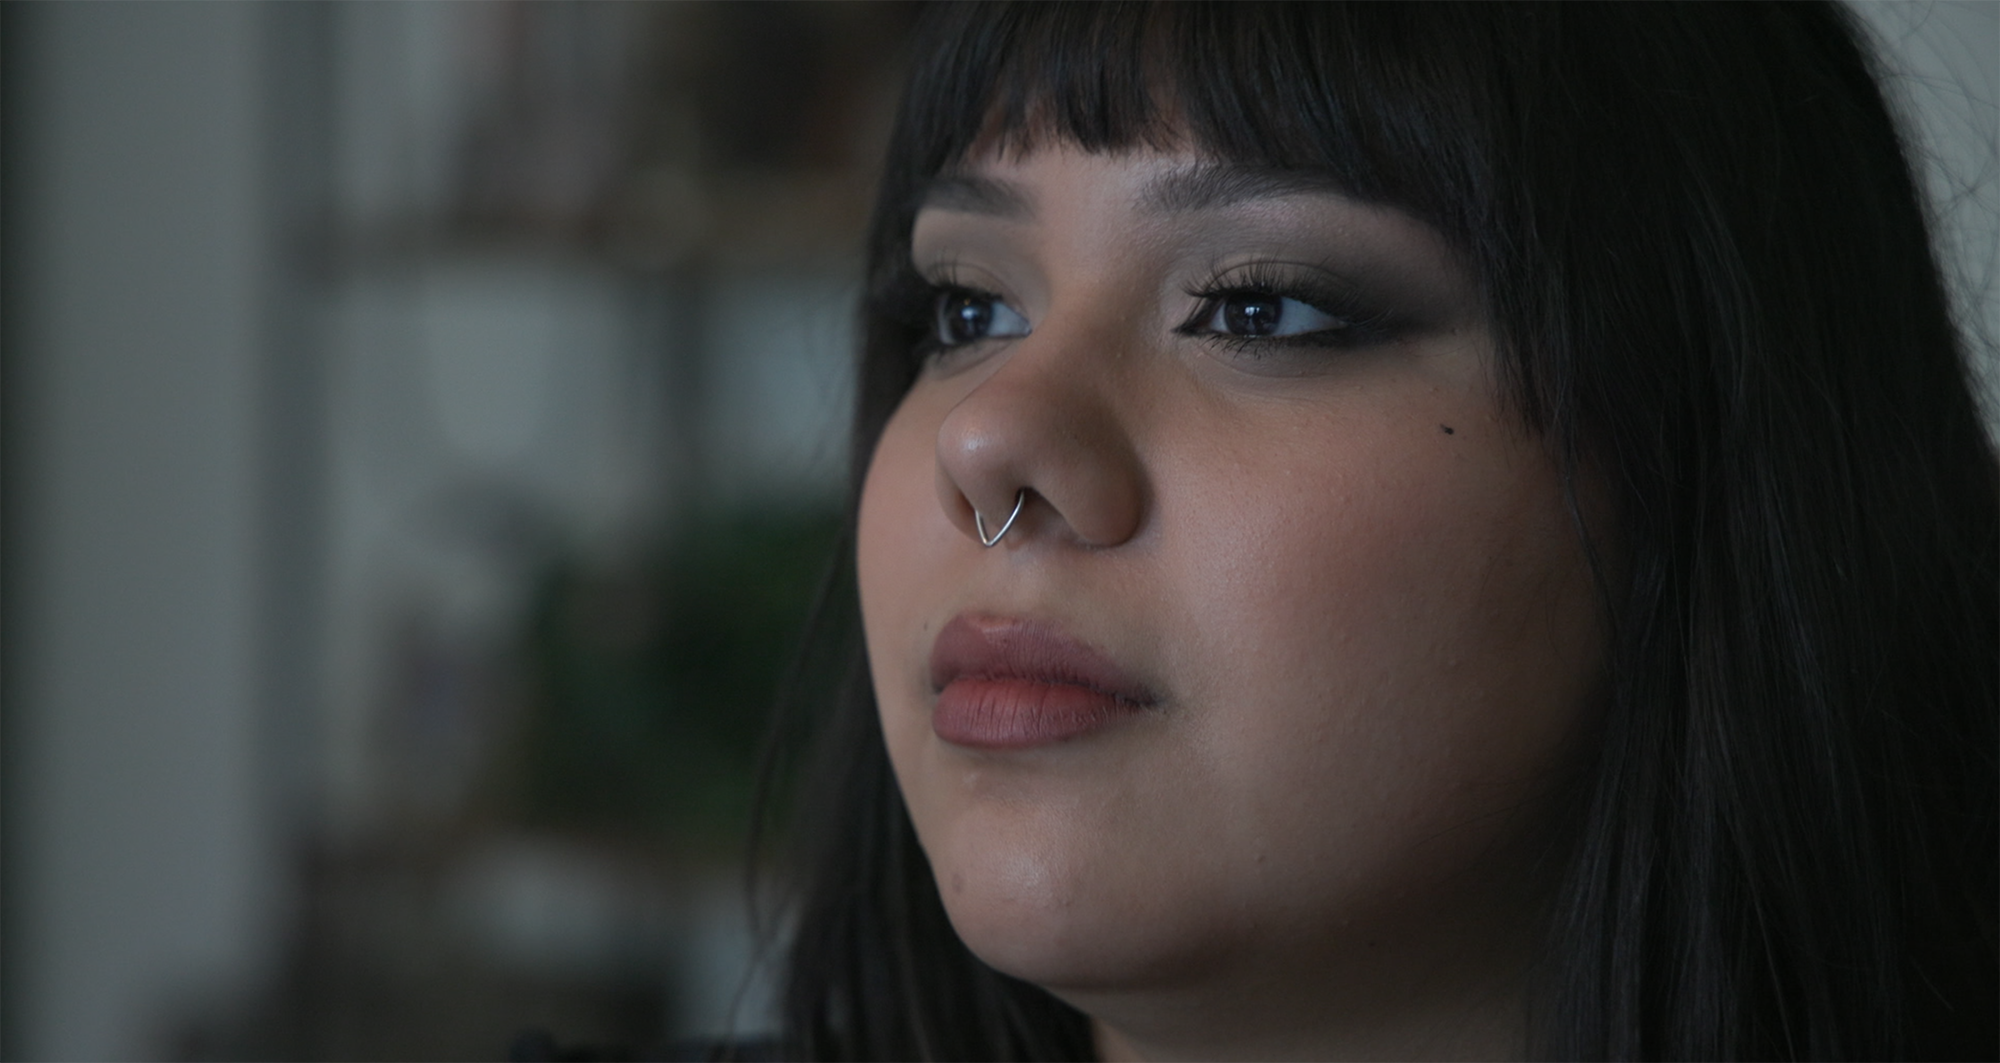 DakotaRei Frausto, who is Mescalero Apache and lives in San Antonio, was 17 years old when they learned they were eight-weeks pregnant. Because of Texas’ six-week abortion ban, they had to travel to New Mexico for the procedure. (Photo by Kevin Palomino/News21)